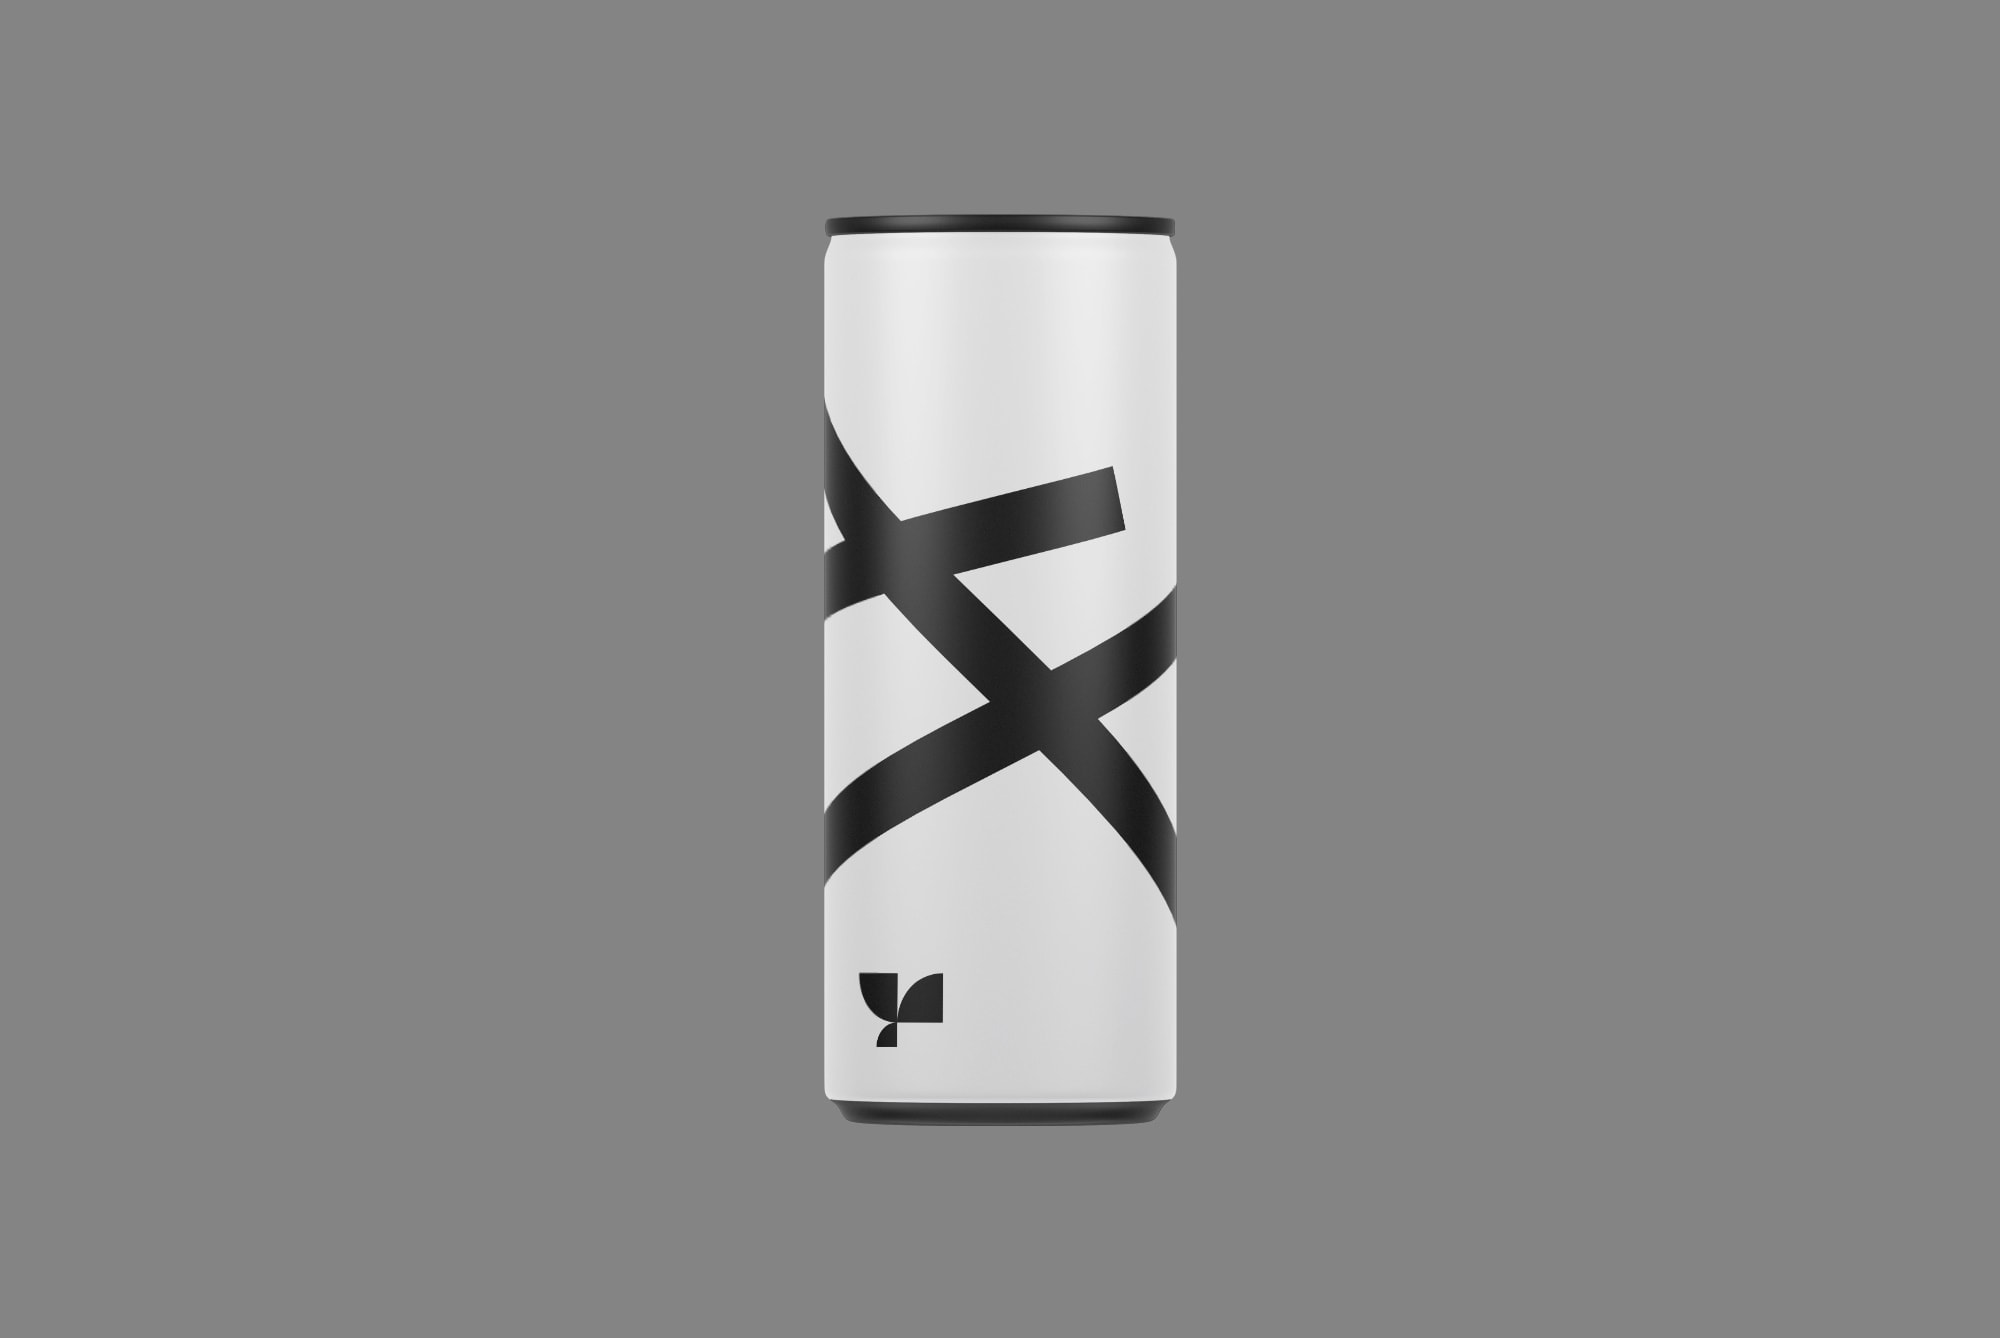 Blank drink can mockup with abstract black pattern, ideal for branding presentations and packaging design mockups, displayed on a gray background.